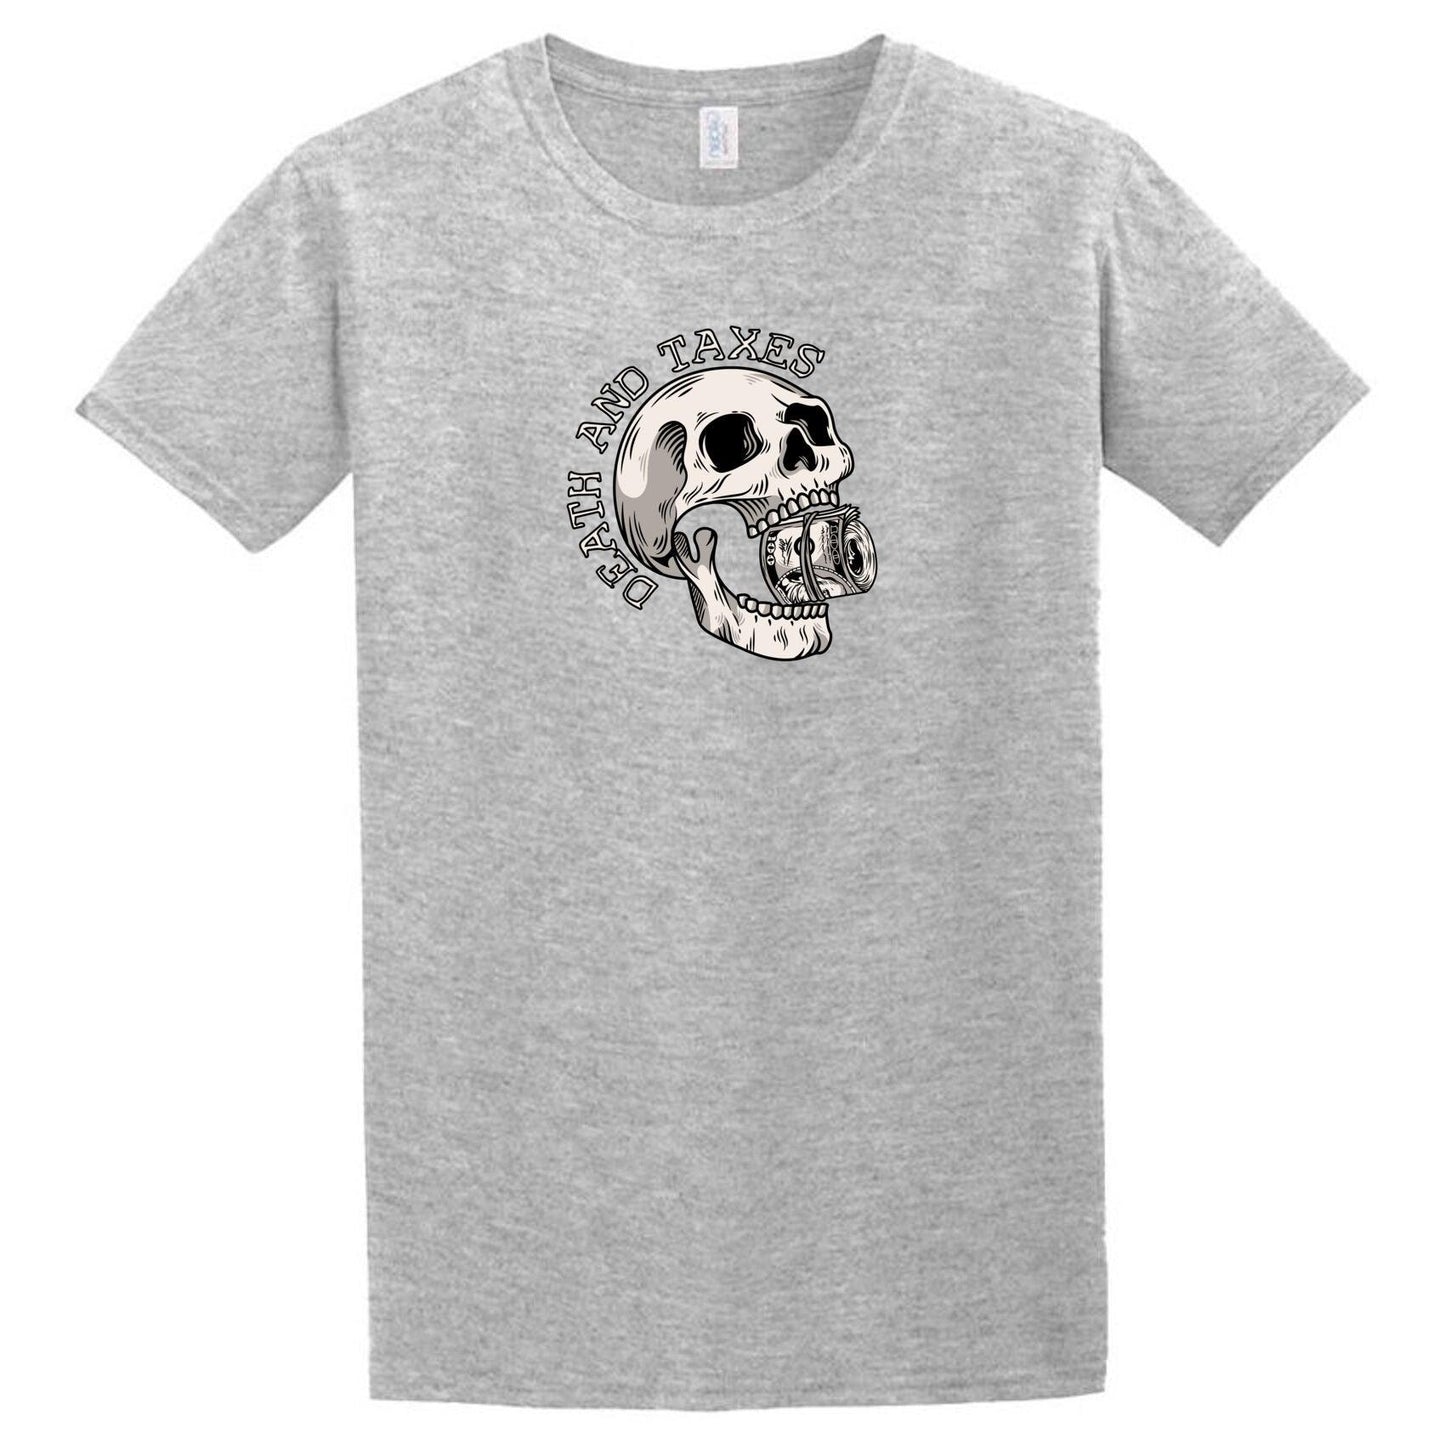 A Death And Taxes T-Shirt with a skull and crossbones on it by Twisted Gifts.